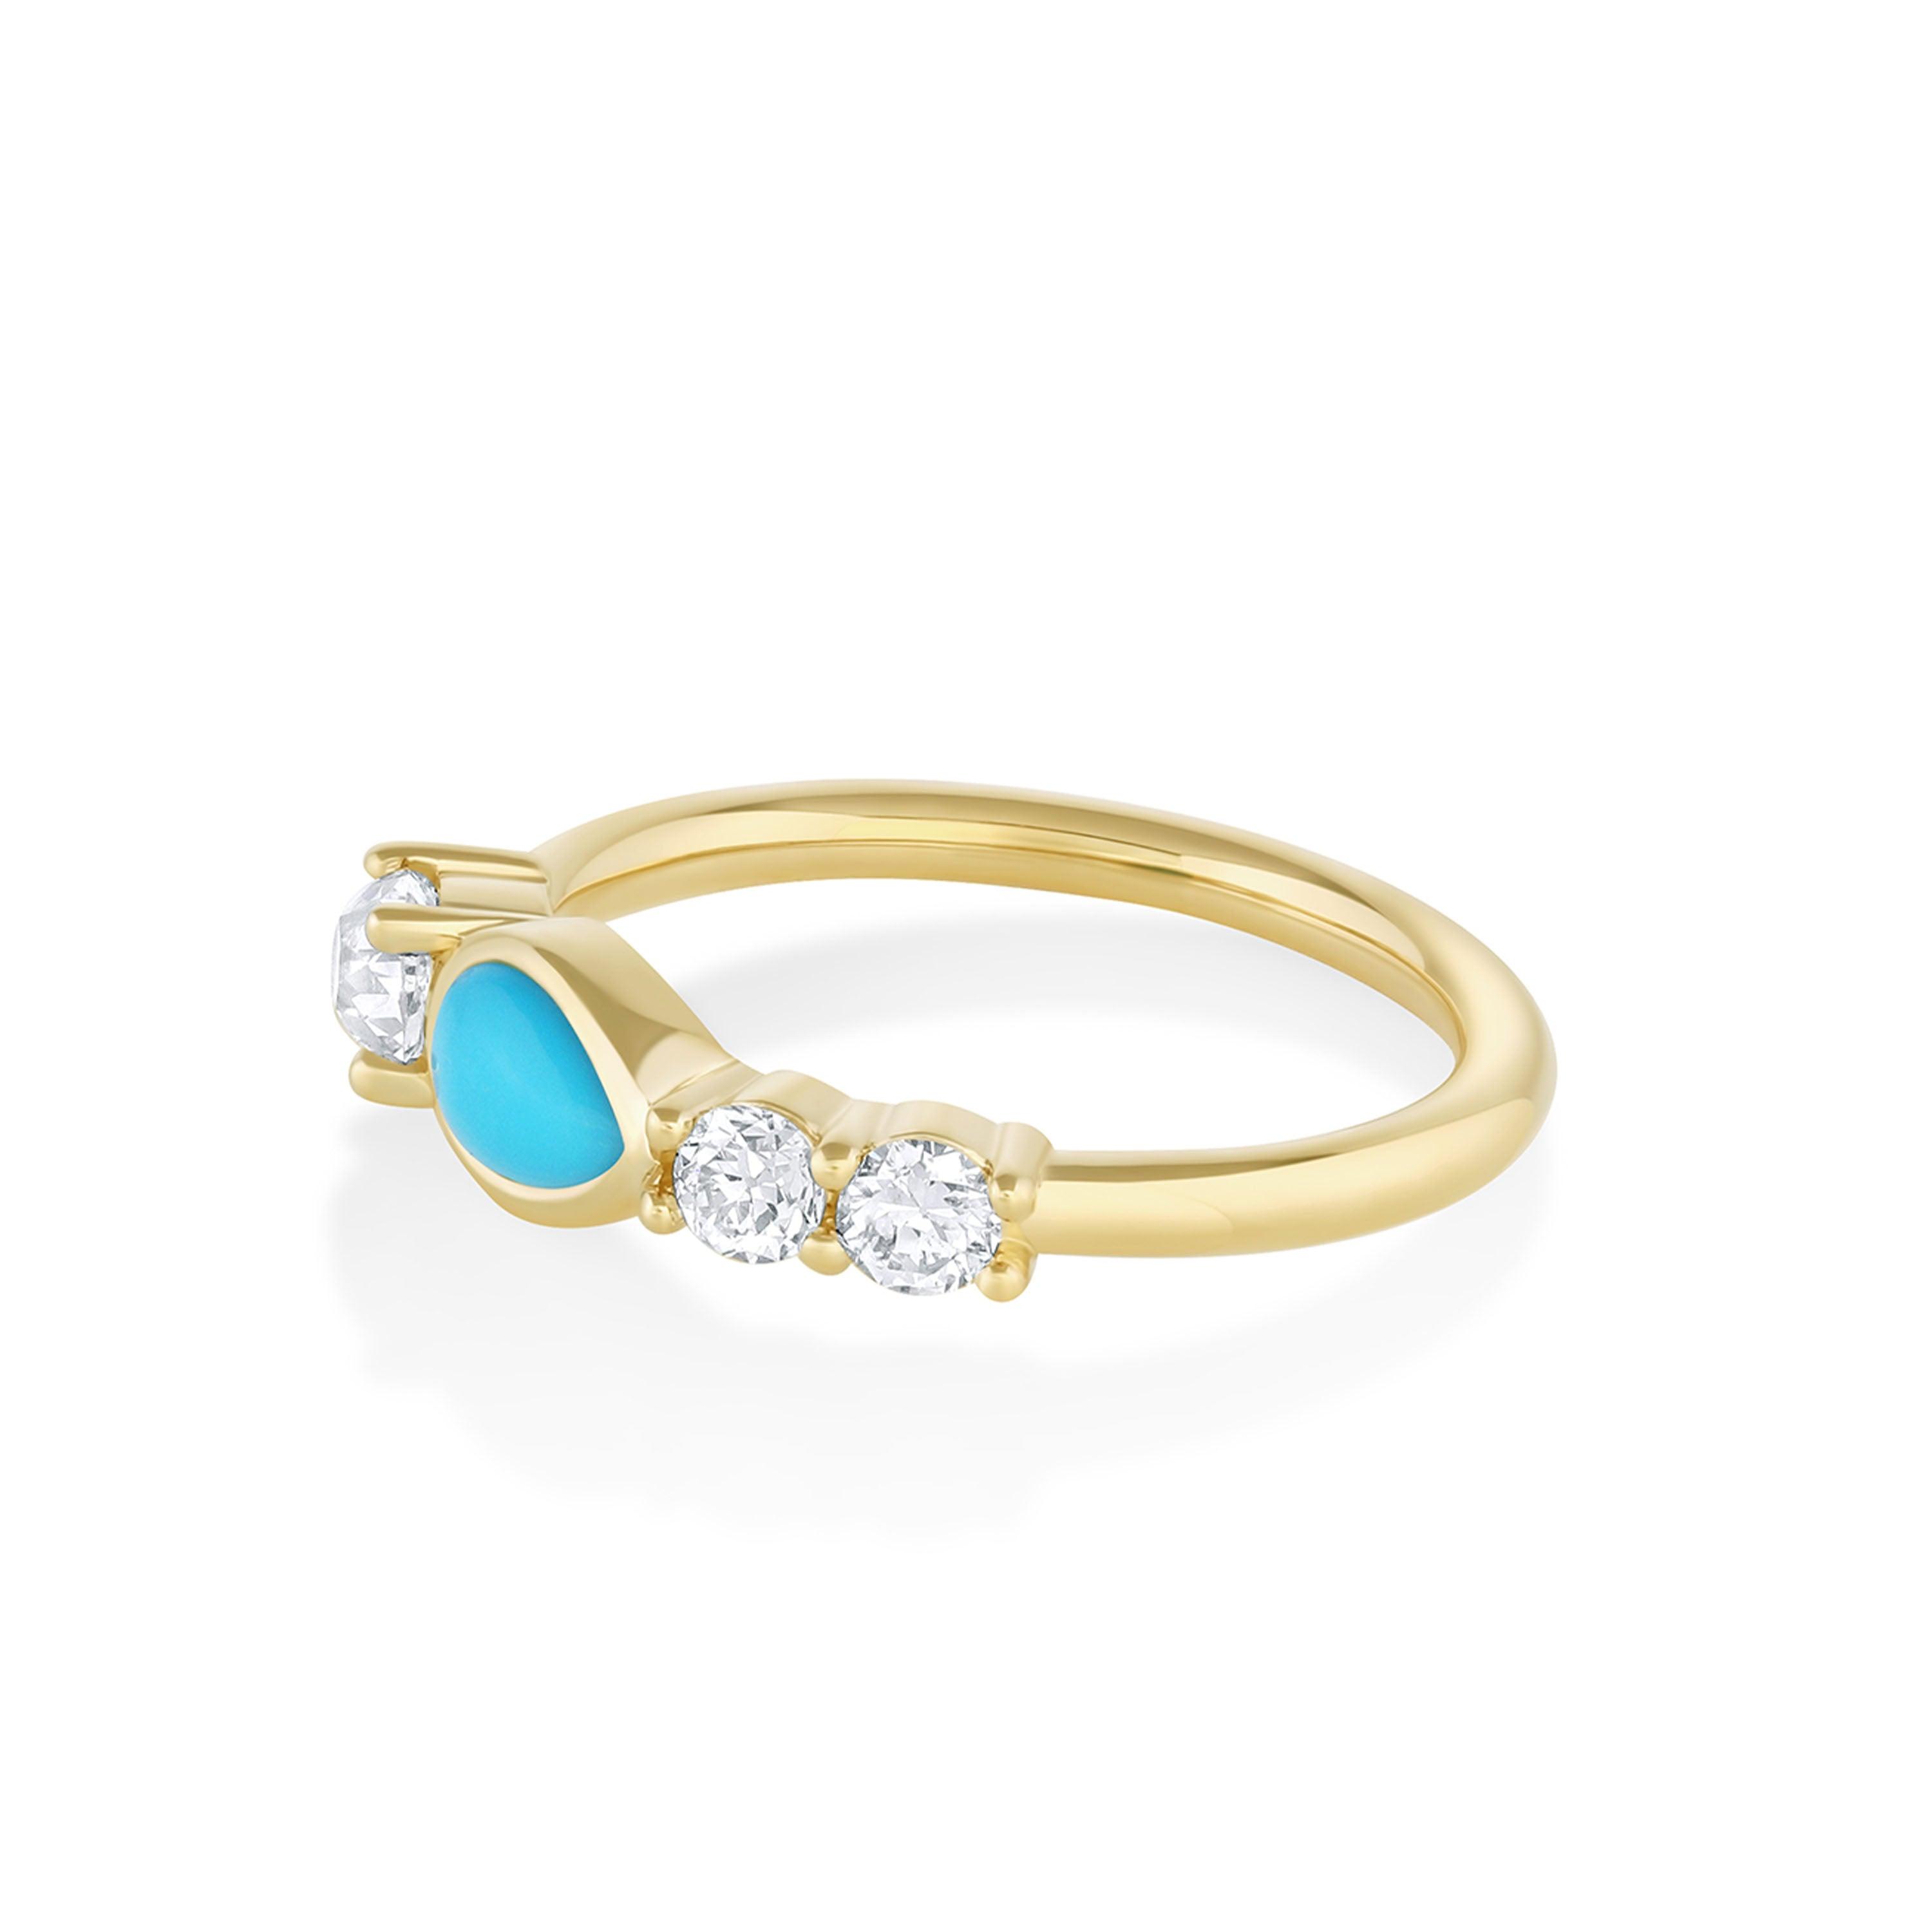 Marrow Fine Jewelry Bezel Set Turquoise Pear And White Diamond Linear Ring